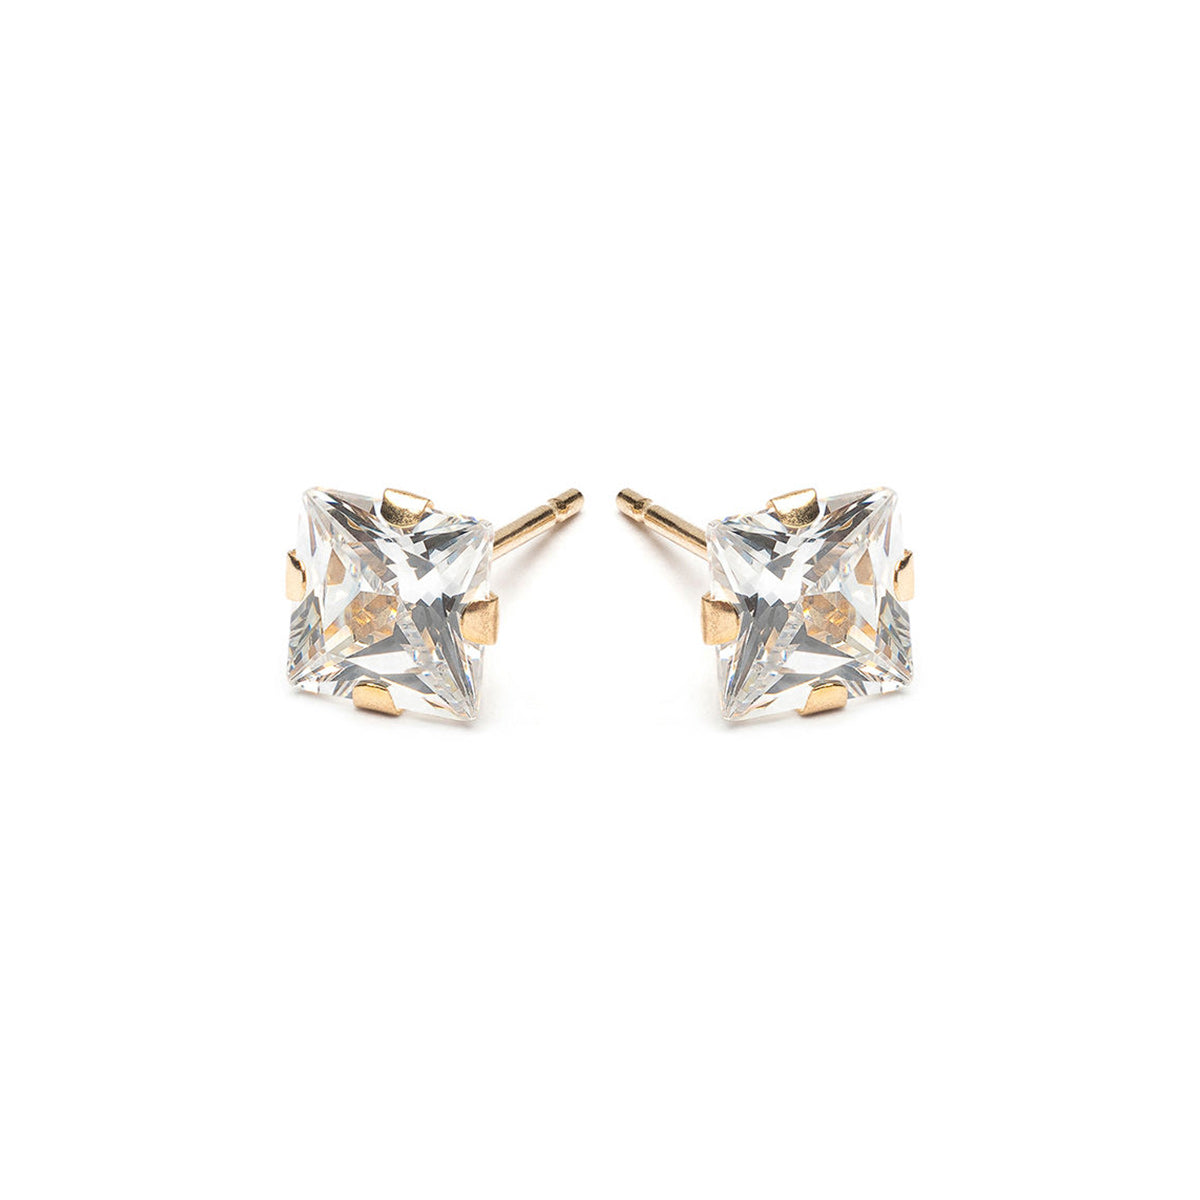 14k Gold 5 mm Square Cubic Zirconia Stud Earrings - Simply Whispers